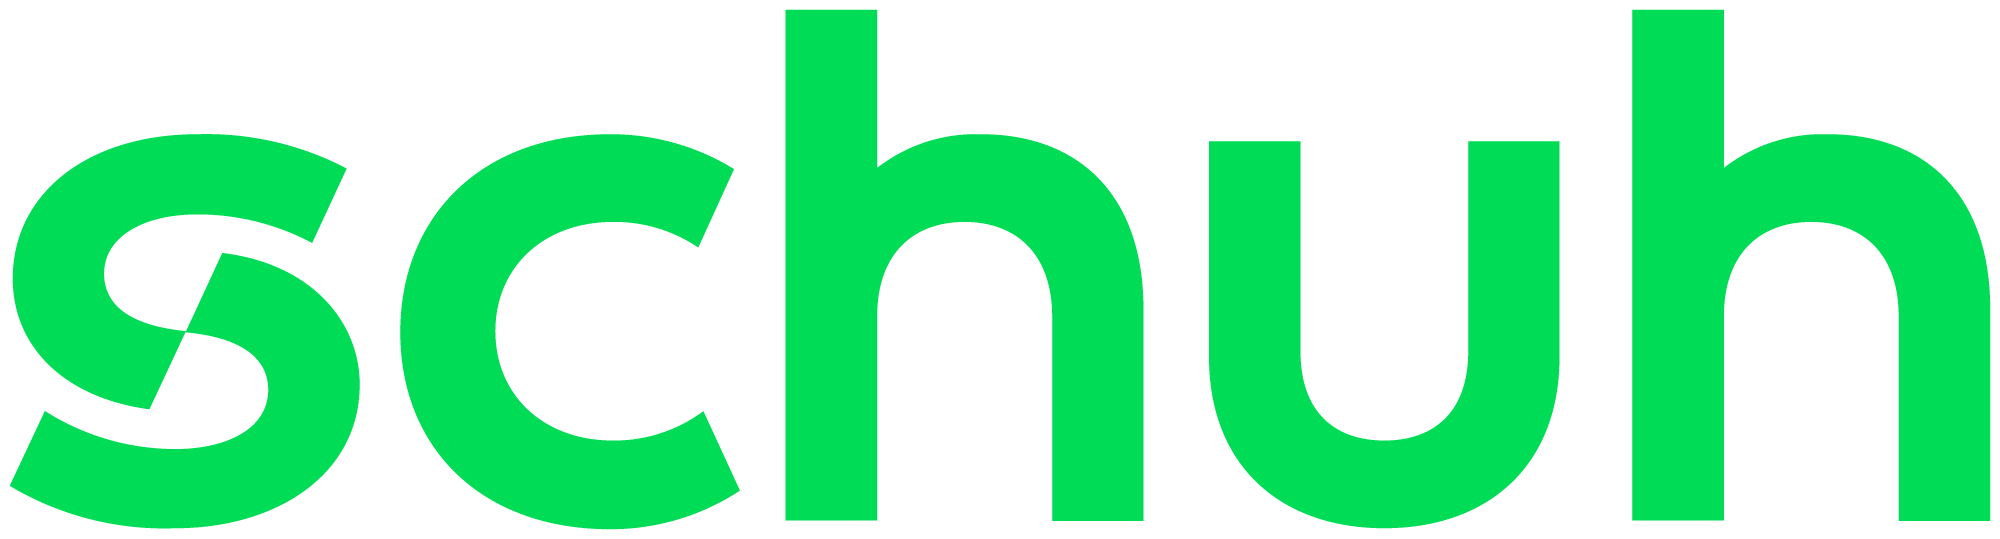 New Logo and Identity for Schuh by Snask